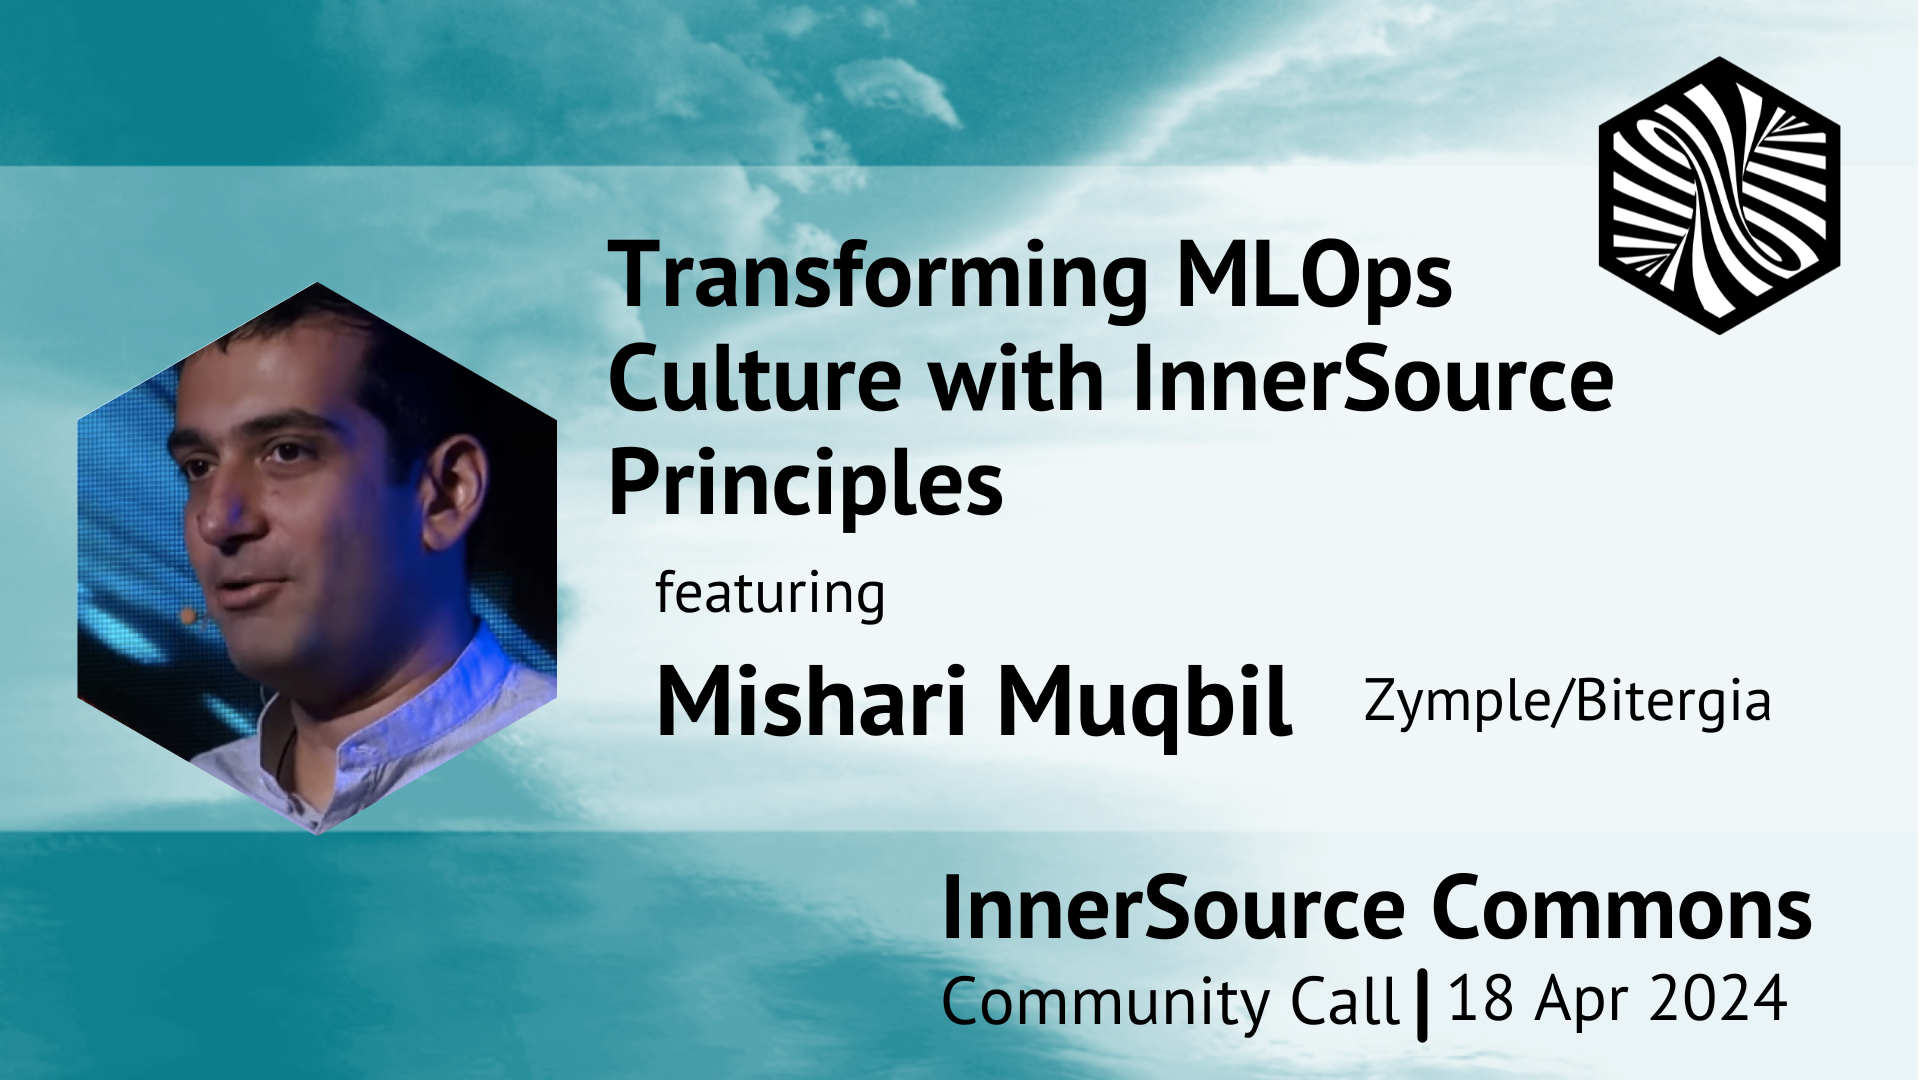 Transforming MLOps Culture with InnerSource Principles